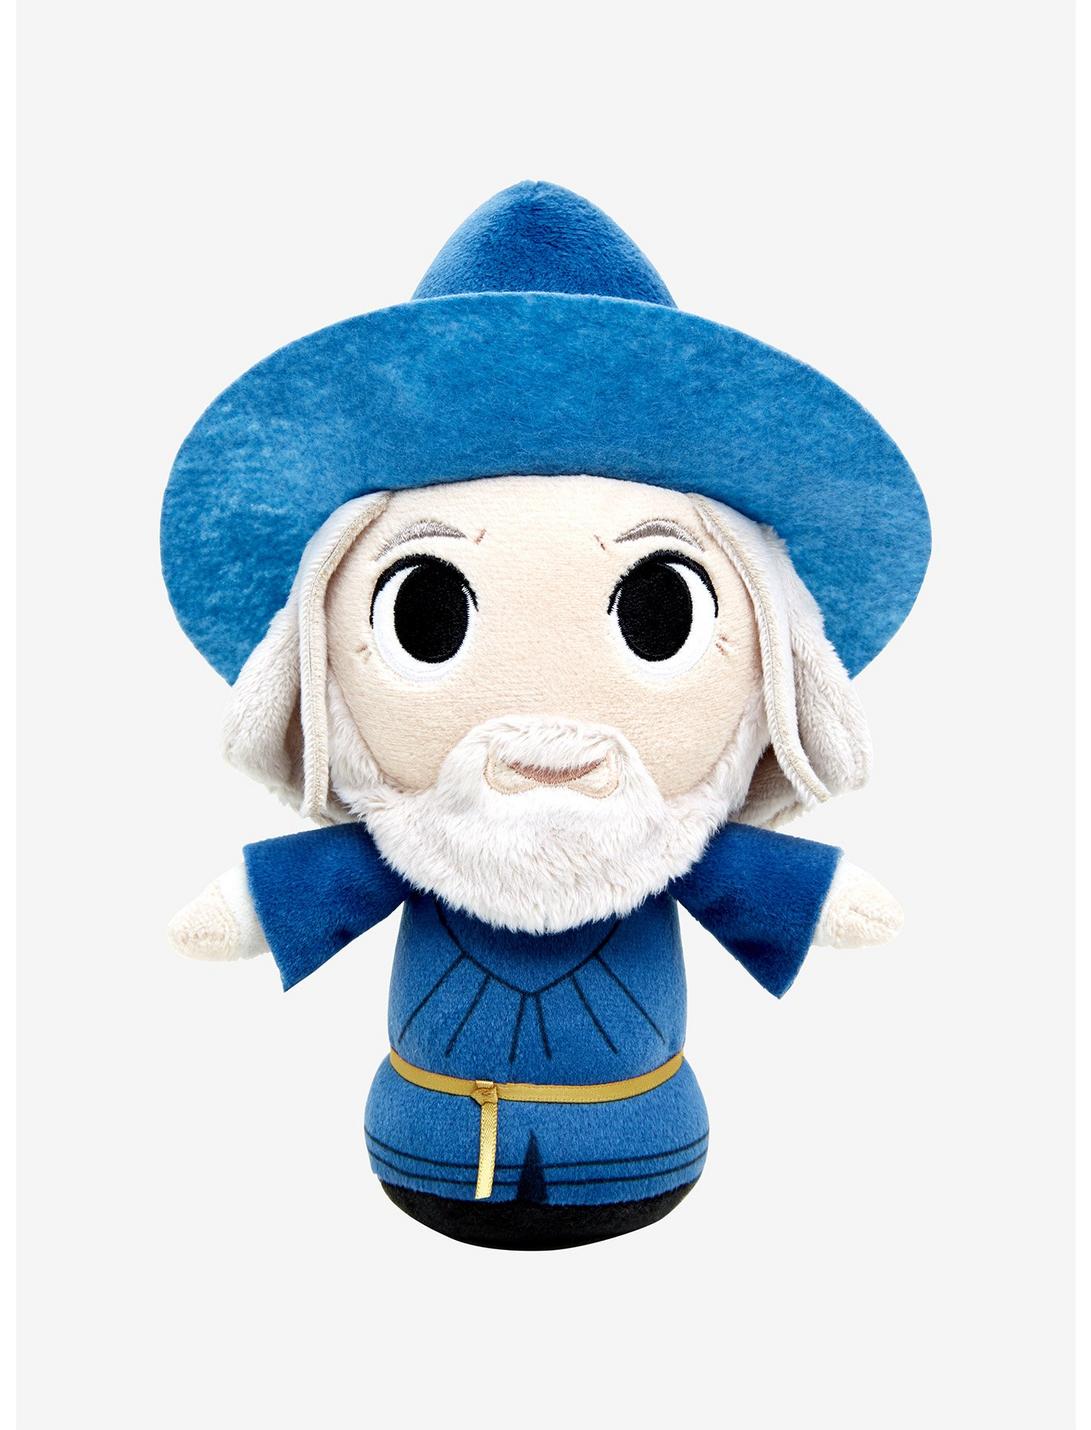 Funko Lord of The Rings Supercute Plushies Gandalf Plush Figure Toys A4 for sale online